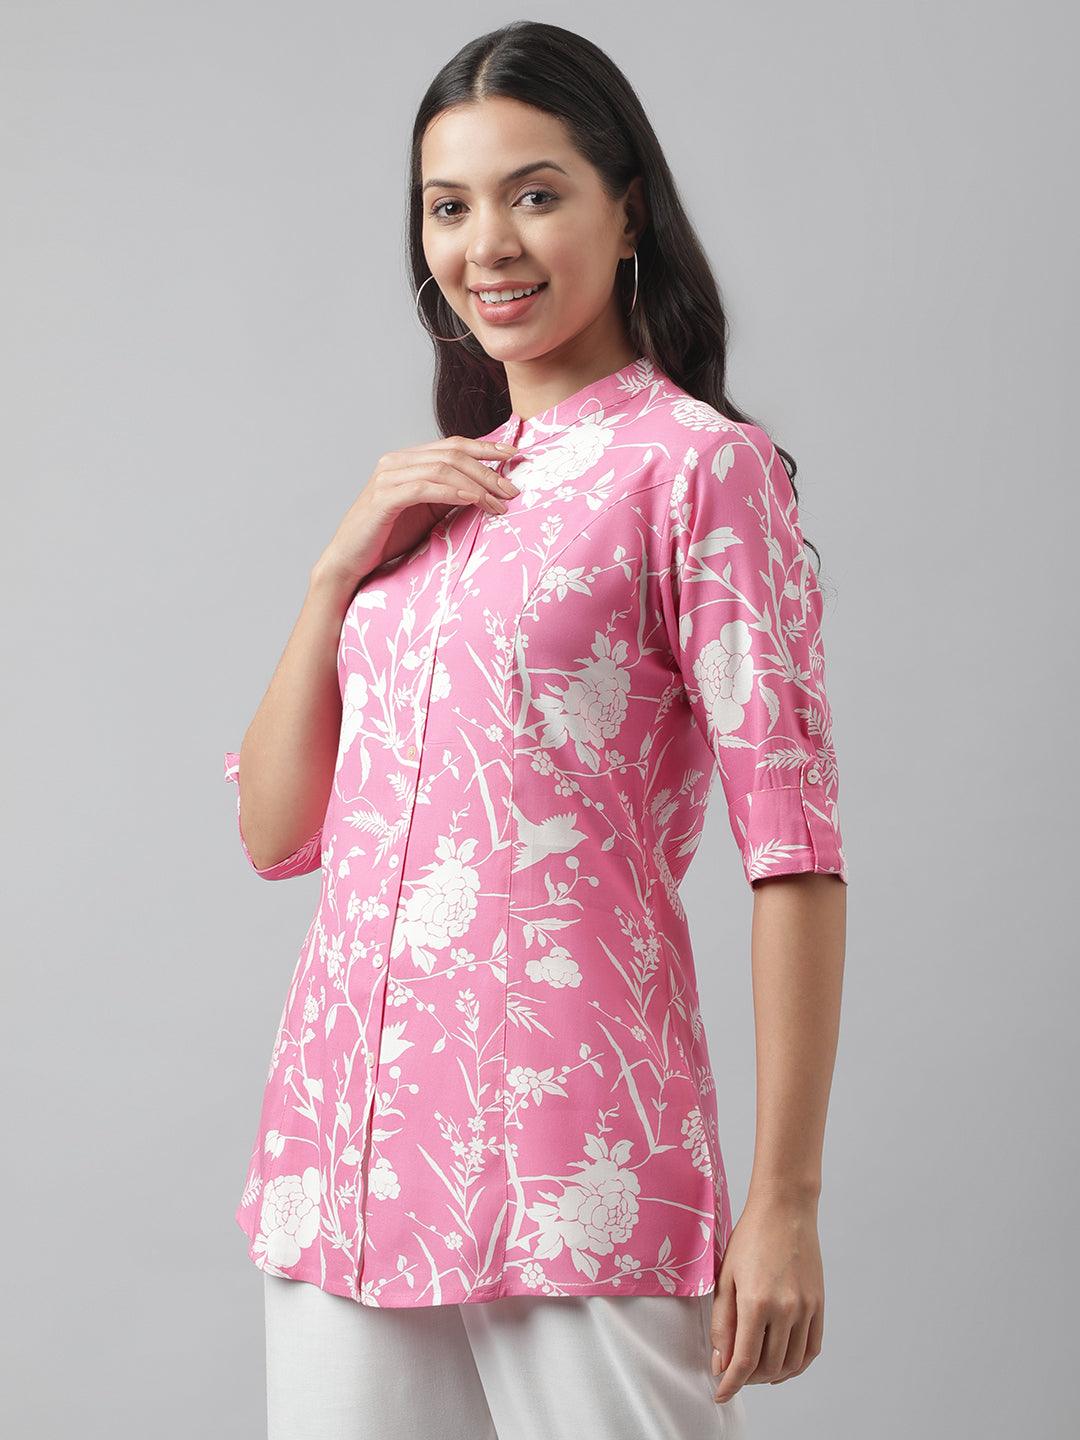 Divena Light Pink Floral Printed Rayon A-line Shirt Style Top - divena world